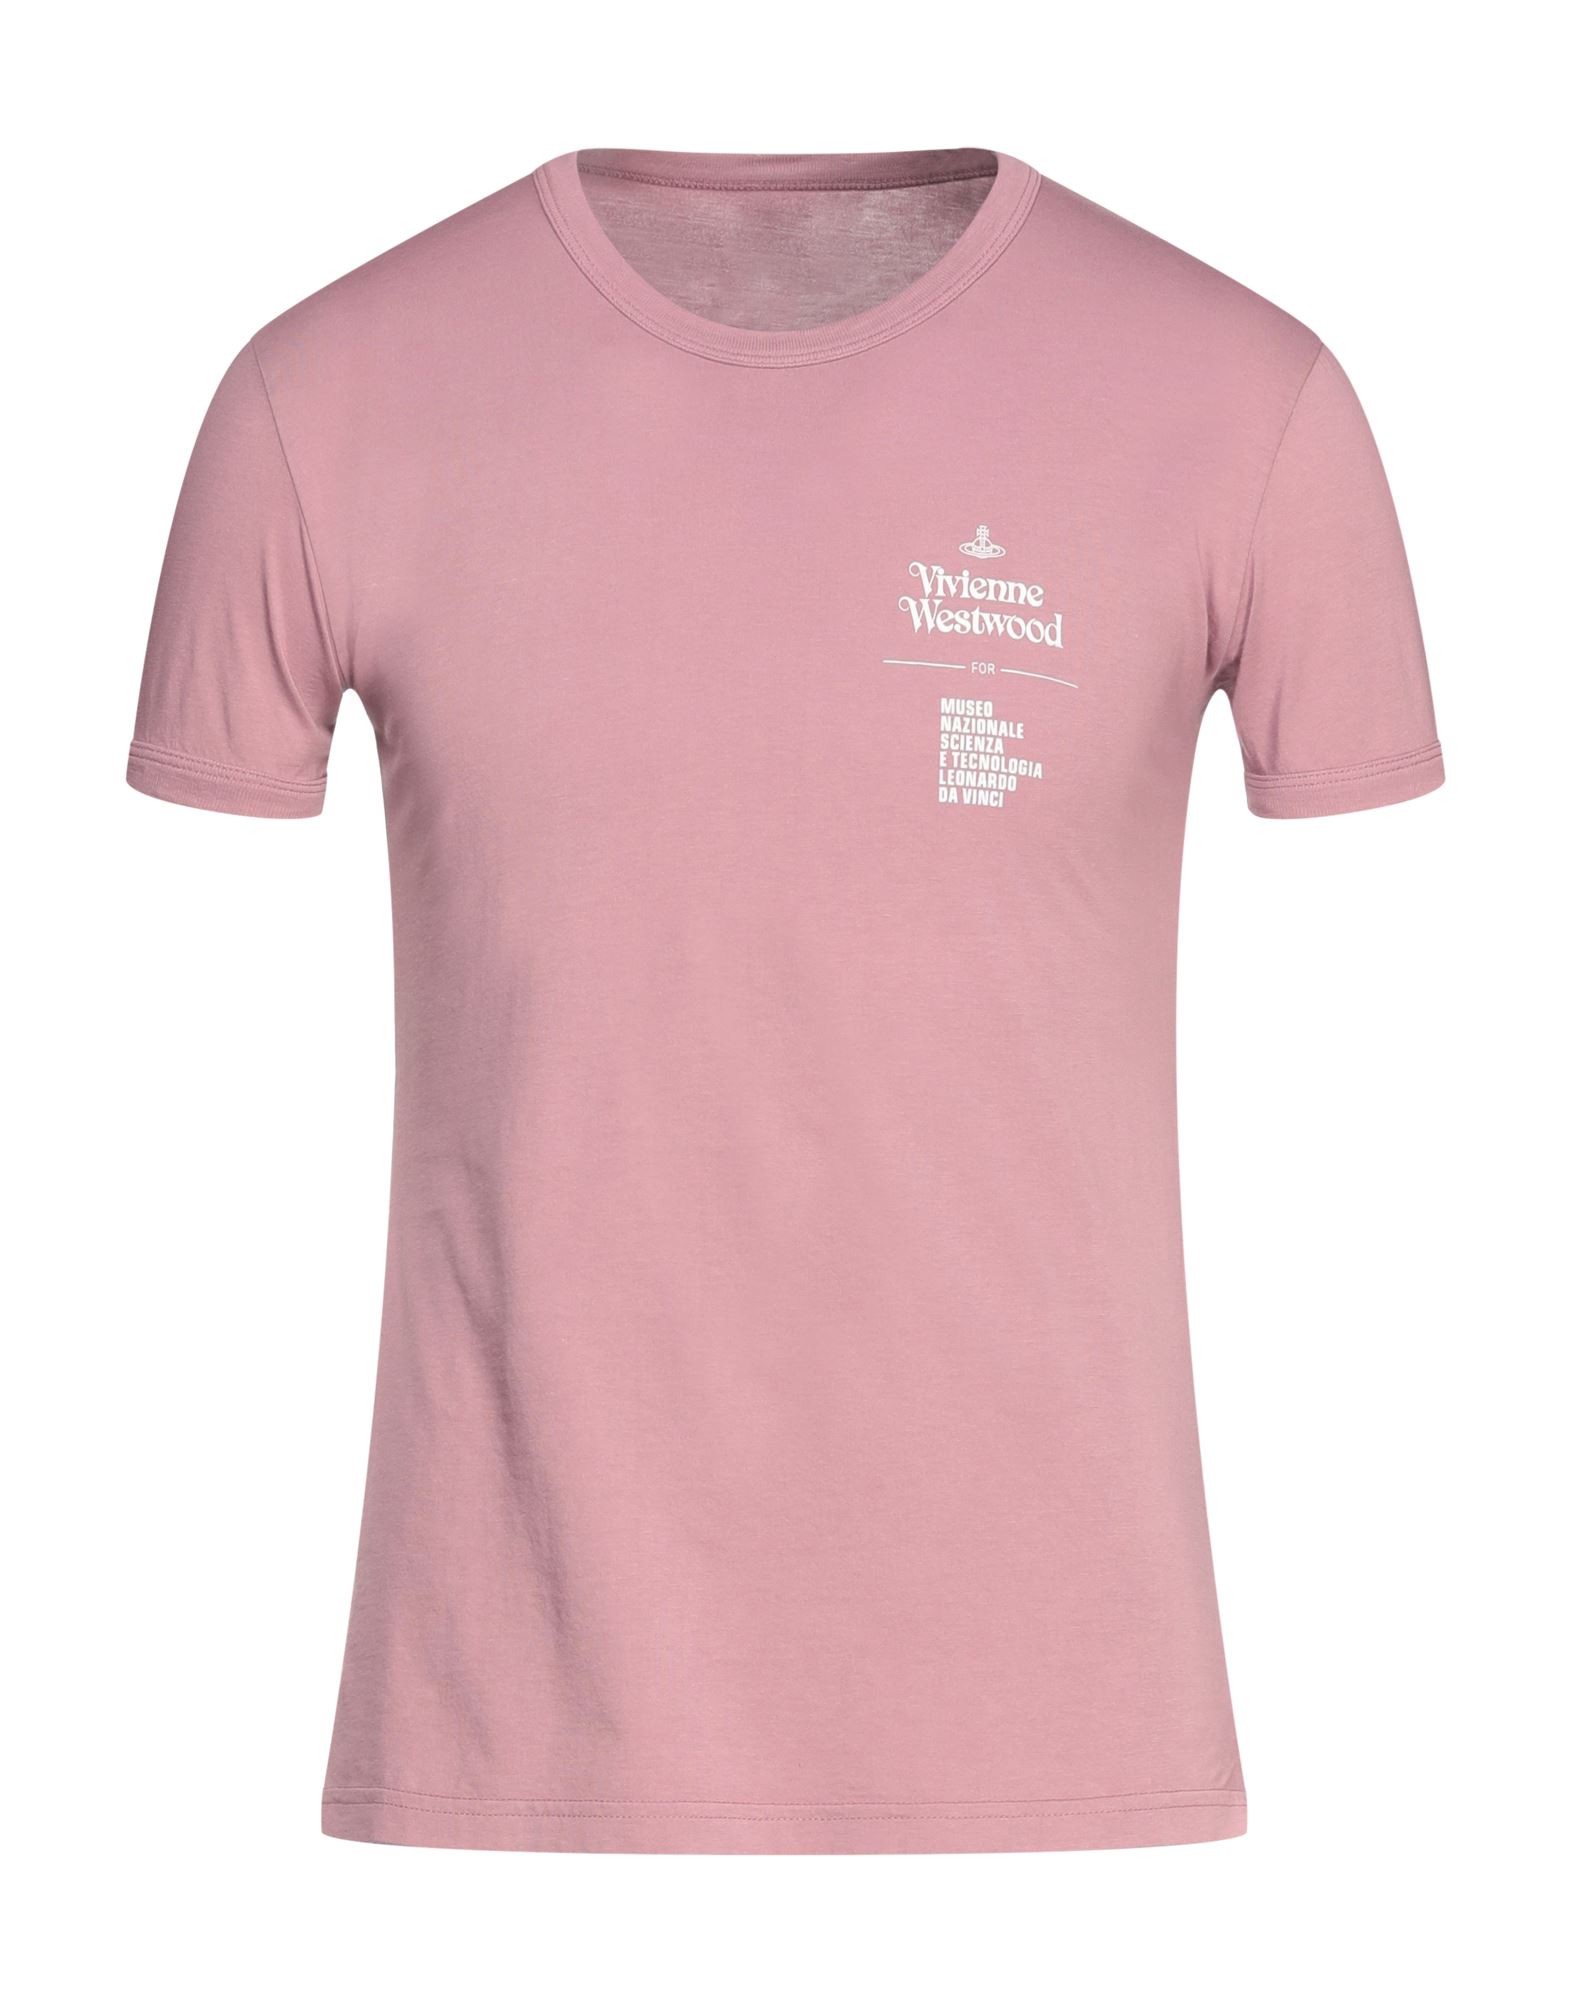 Vivienne Westwood Anglomania T-shirts In Pastel Pink